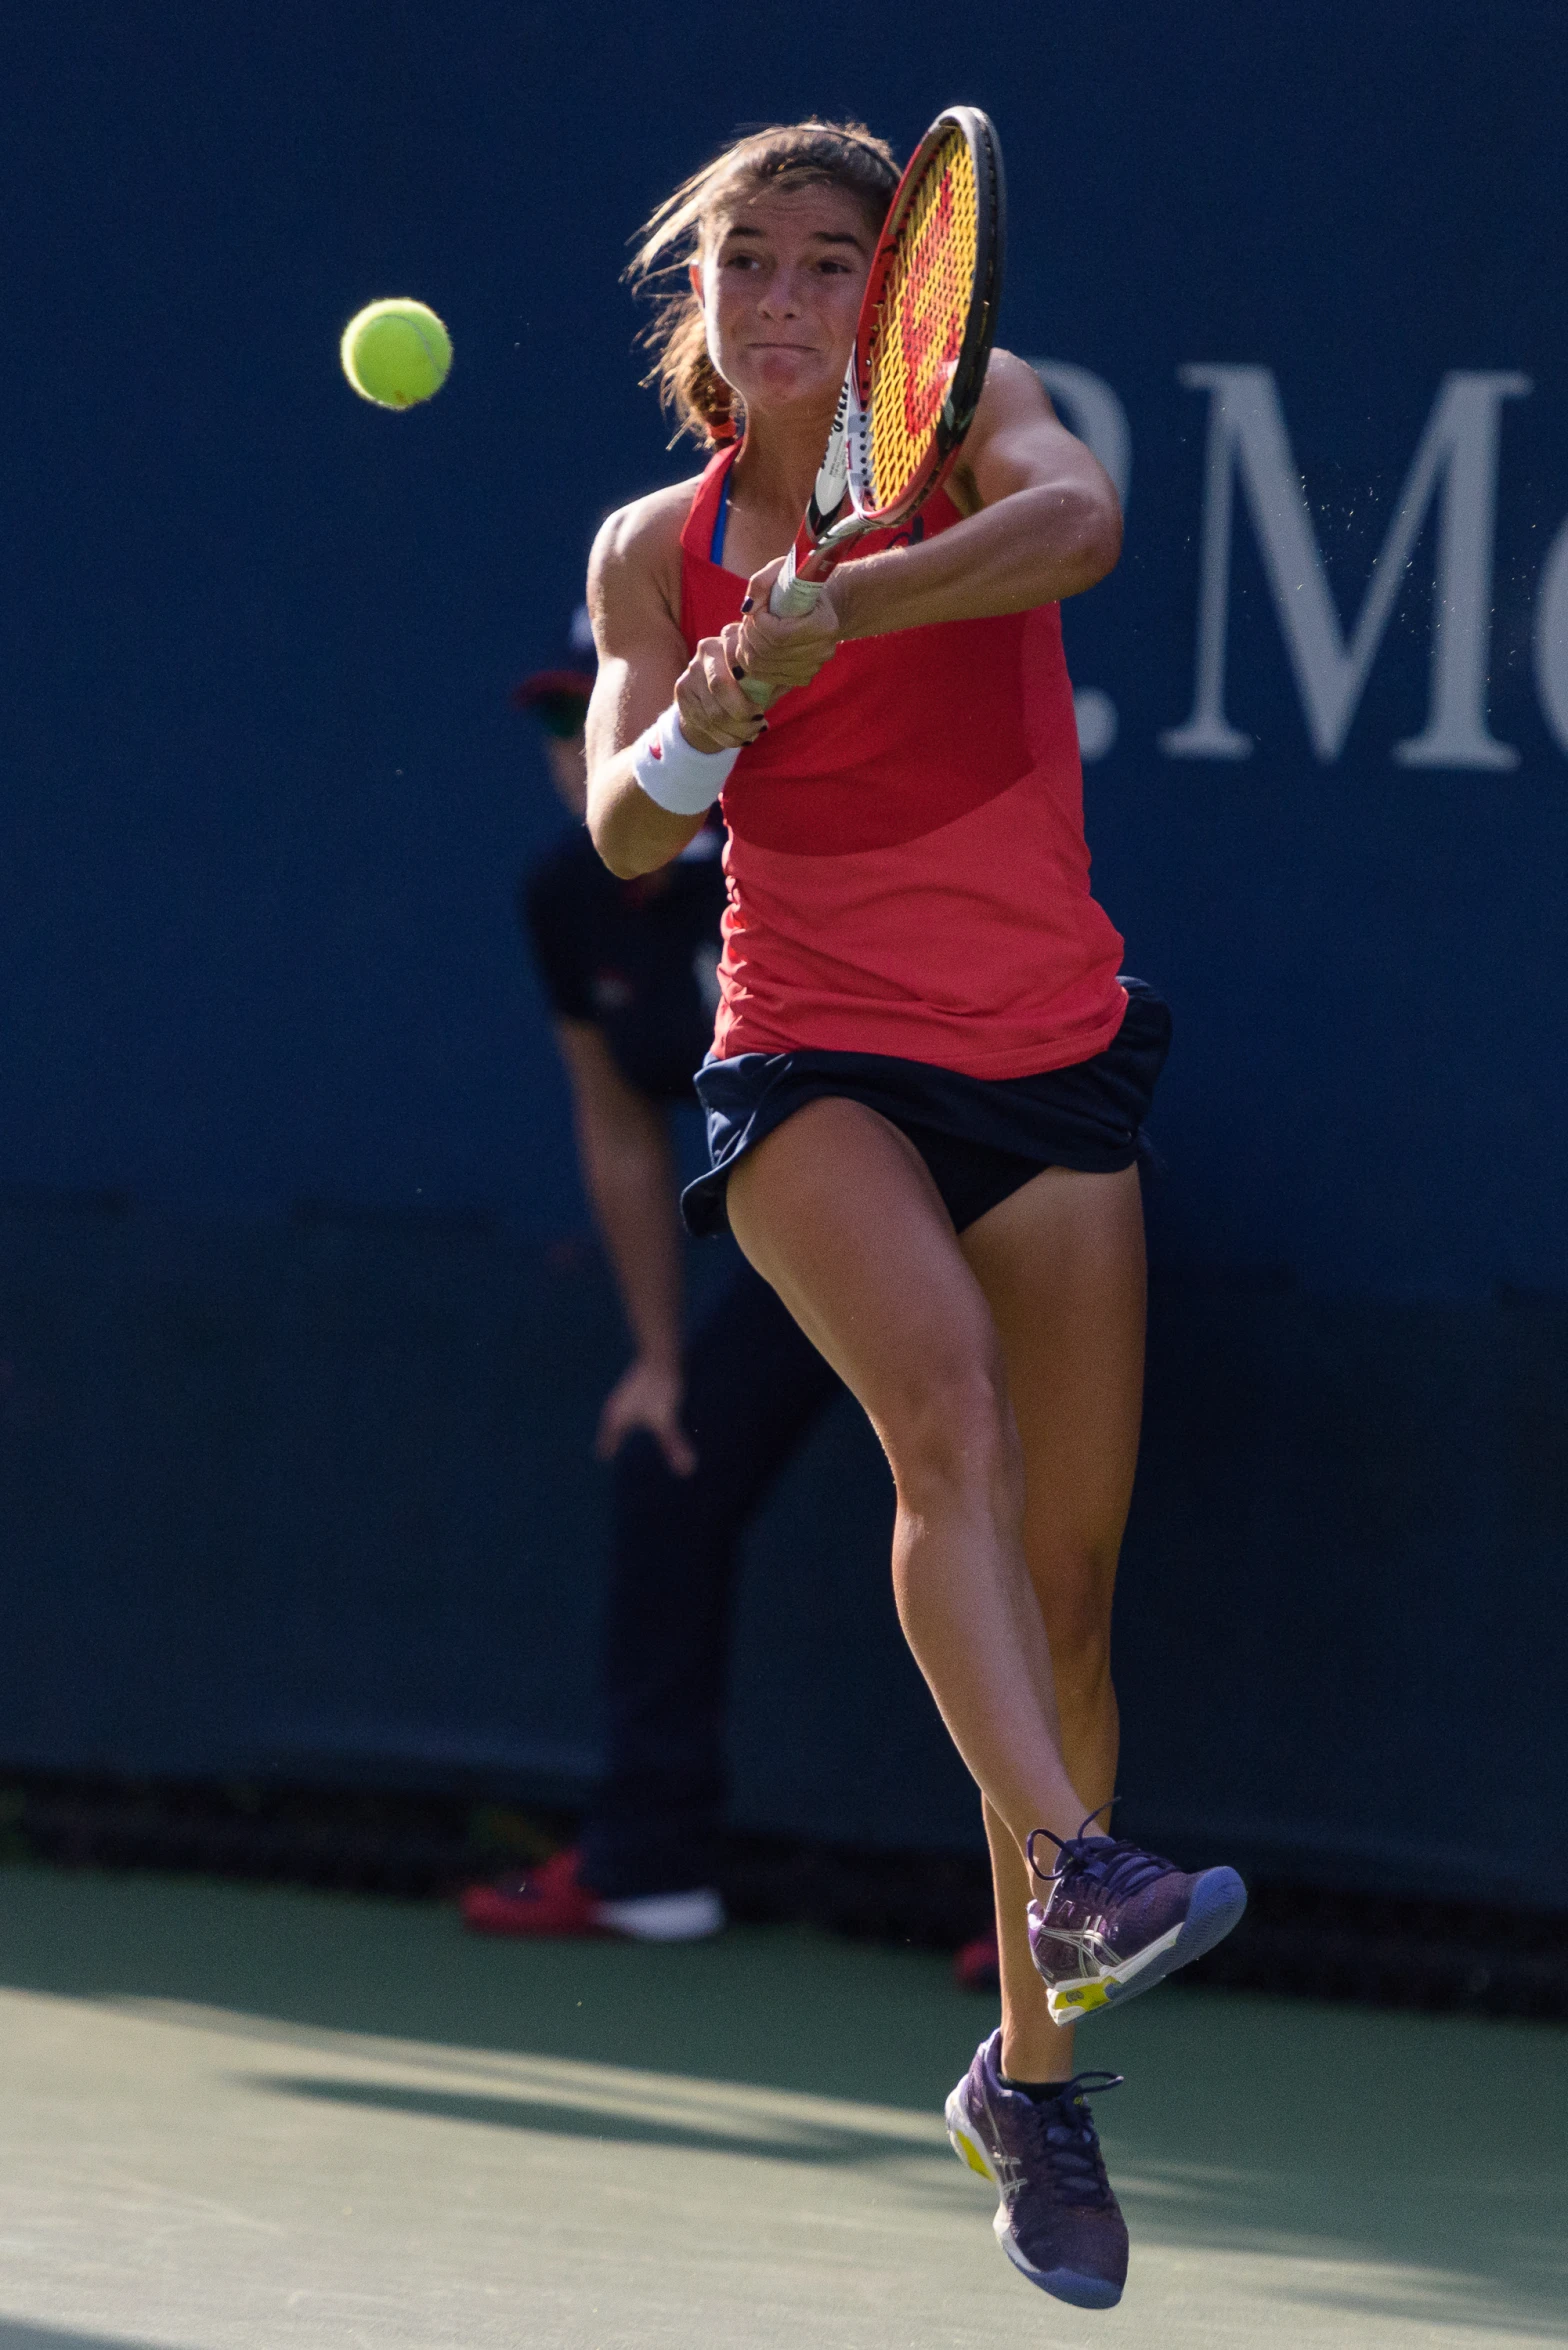 a tennis player jumping to return the ball with her racket